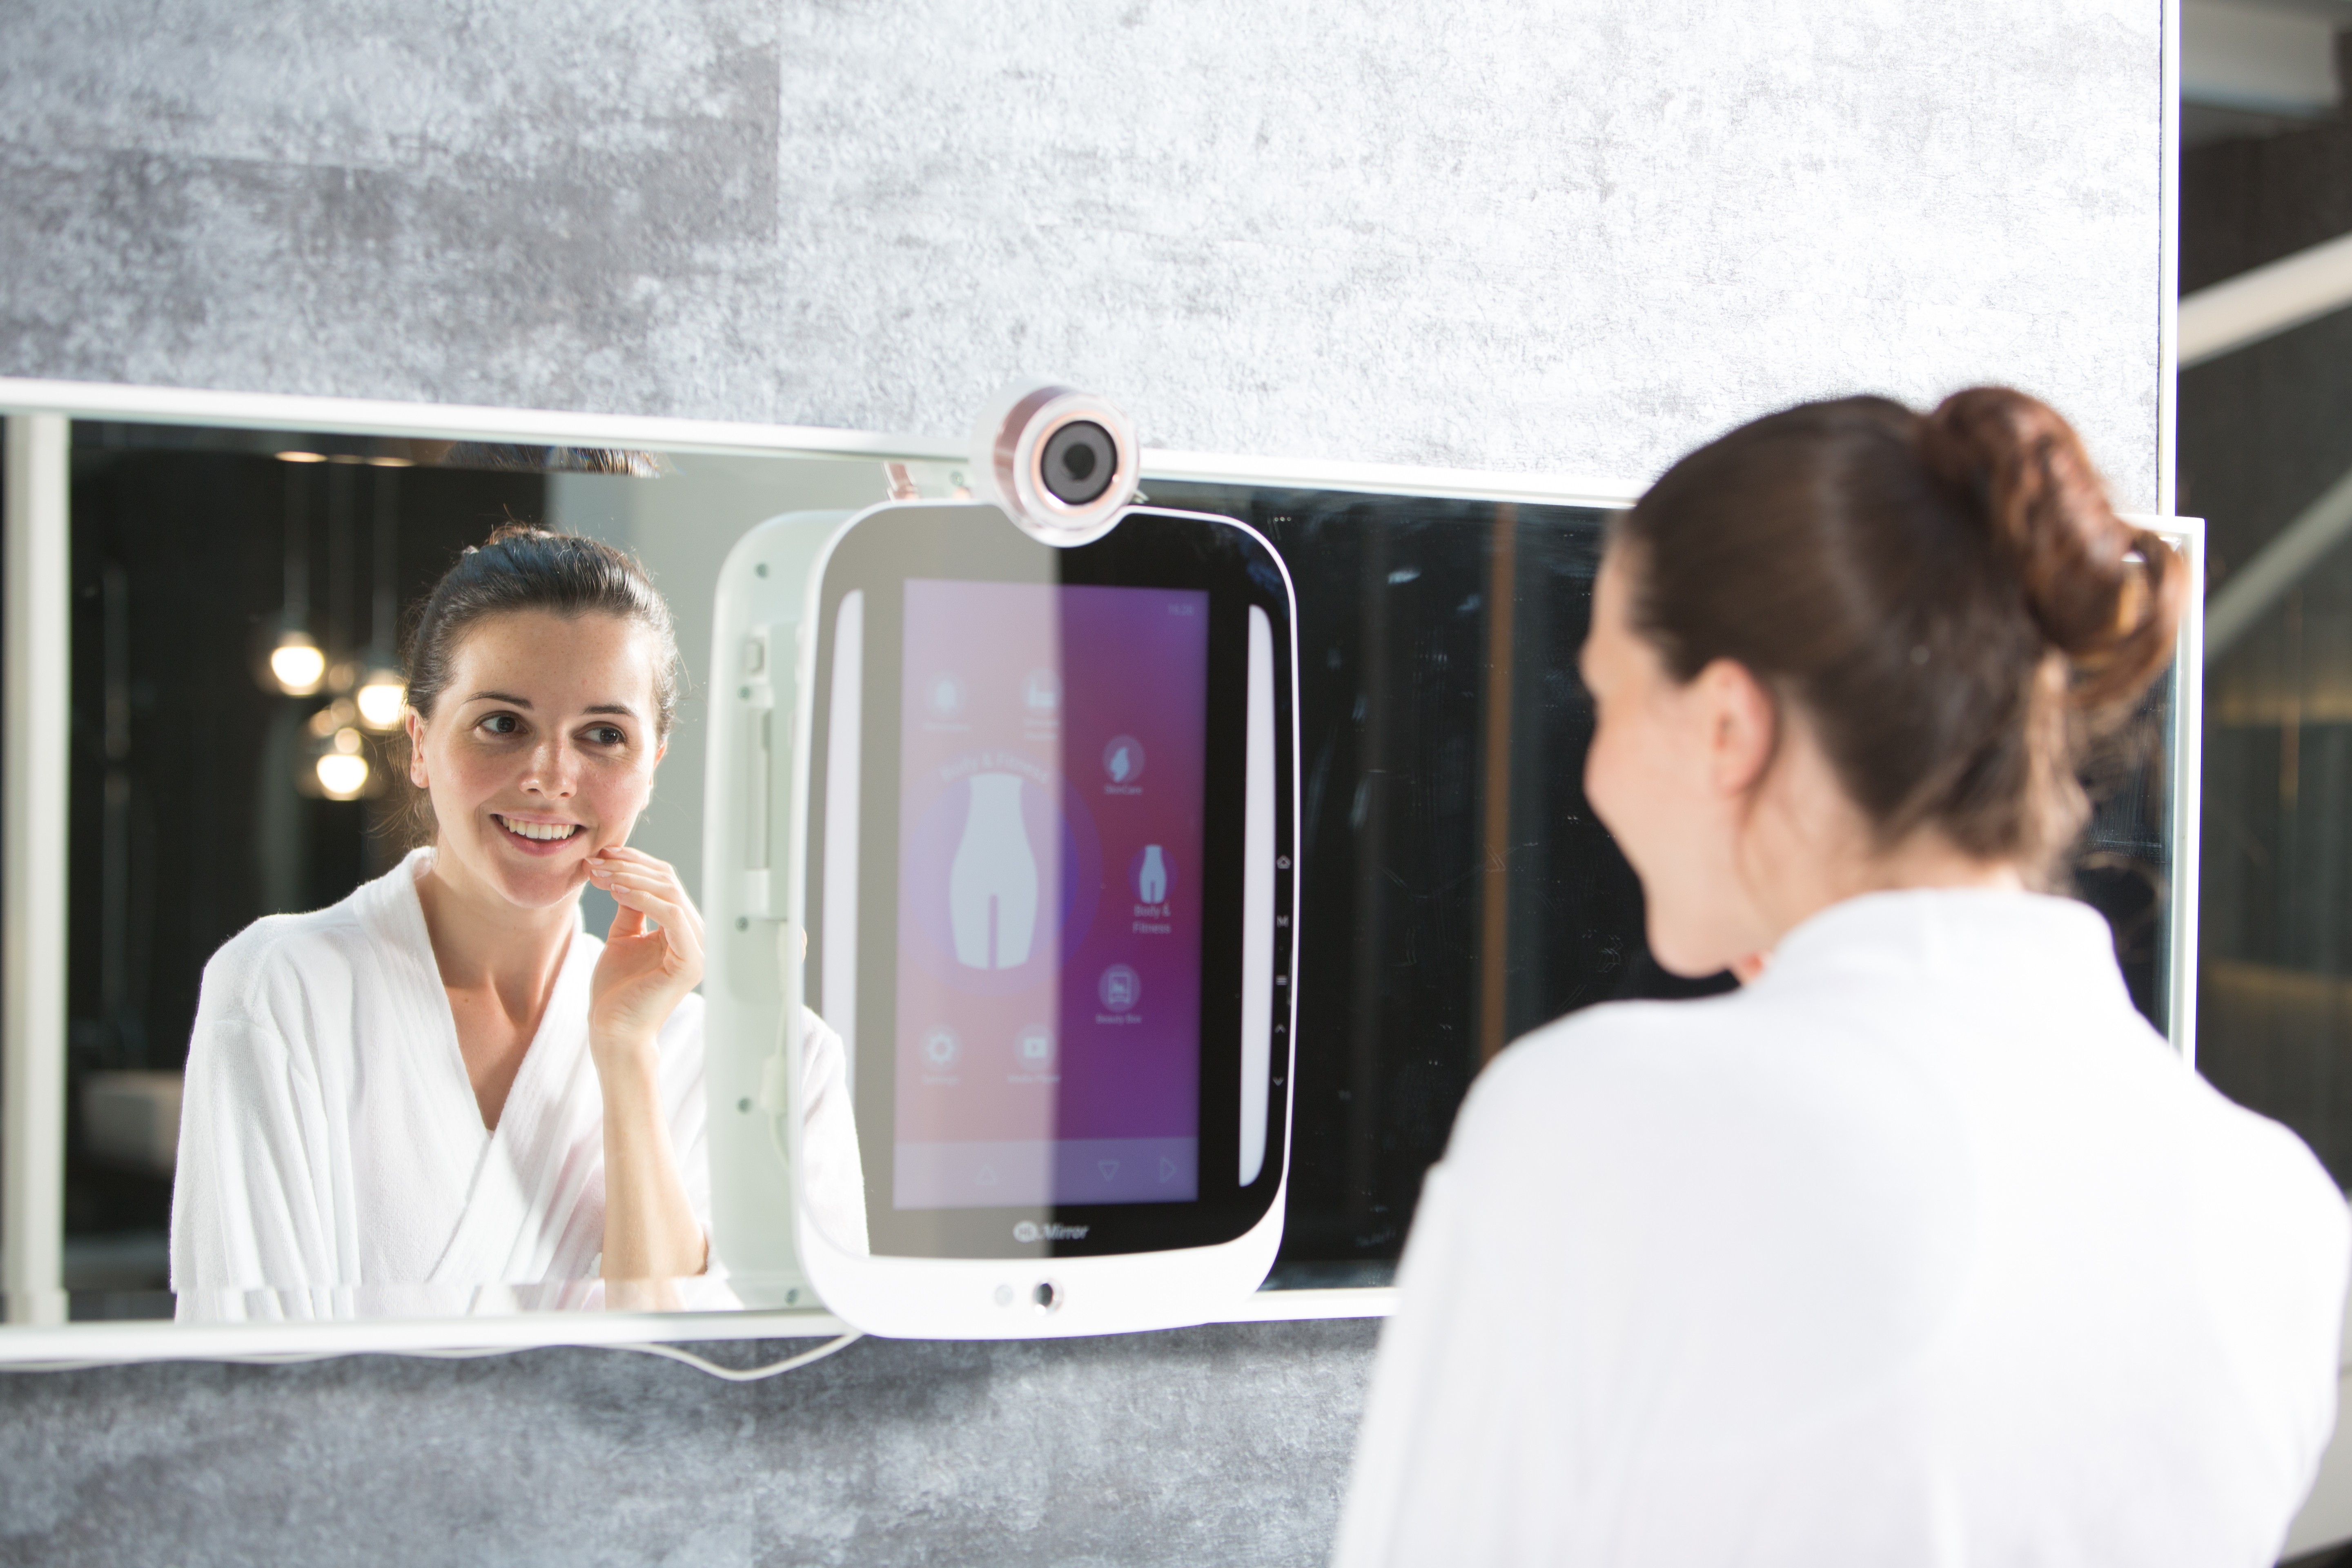 More than one company has been developing smart mirrors.